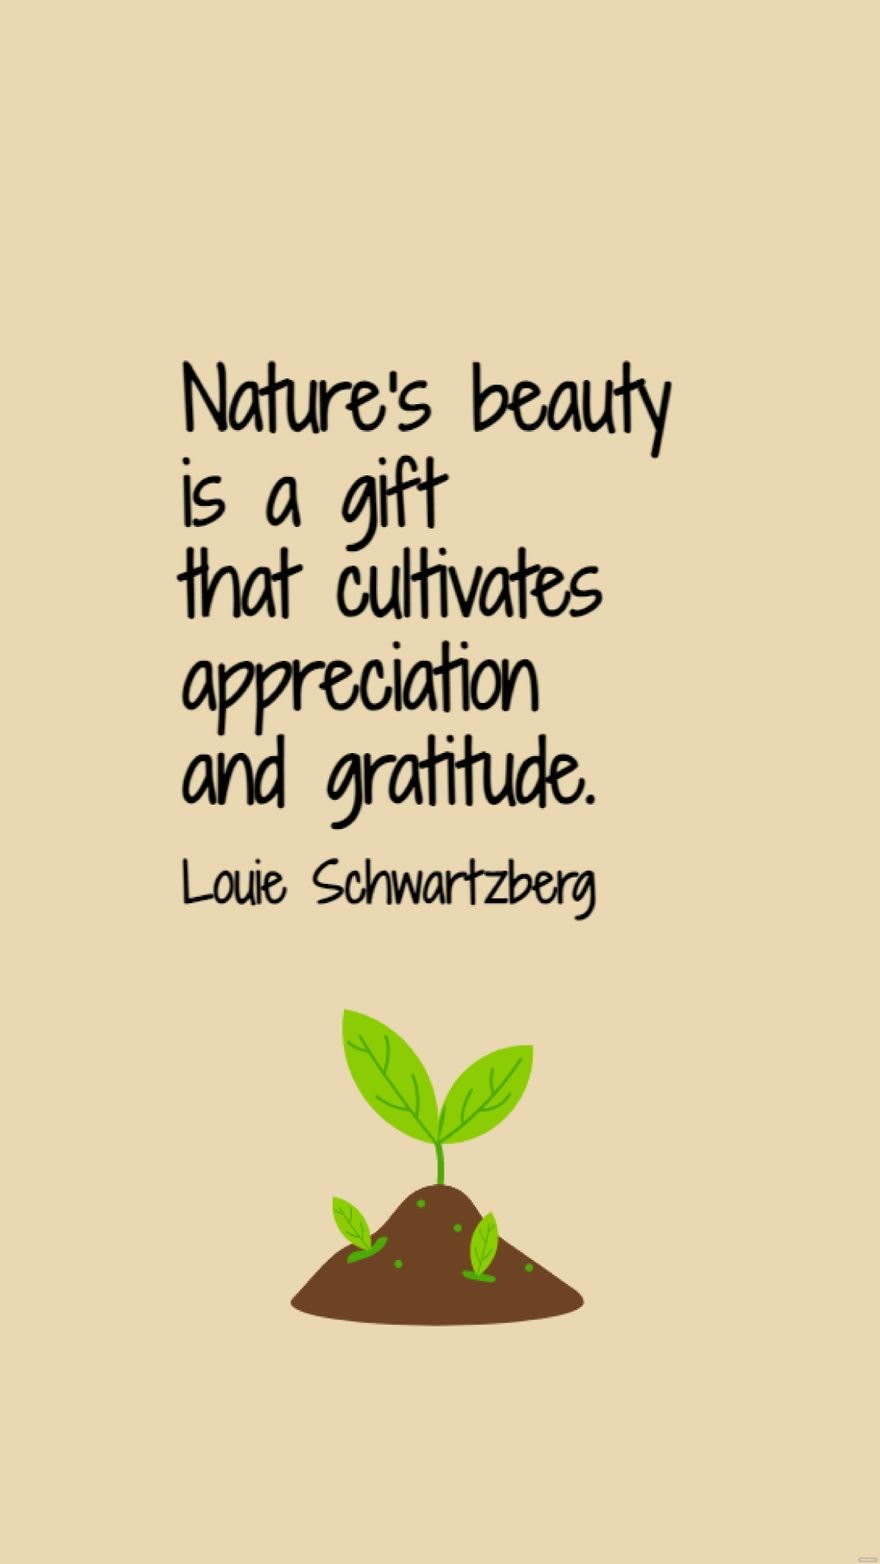 Louie Schwartzberg - Nature's beauty is a gift that cultivates appreciation and gratitude.